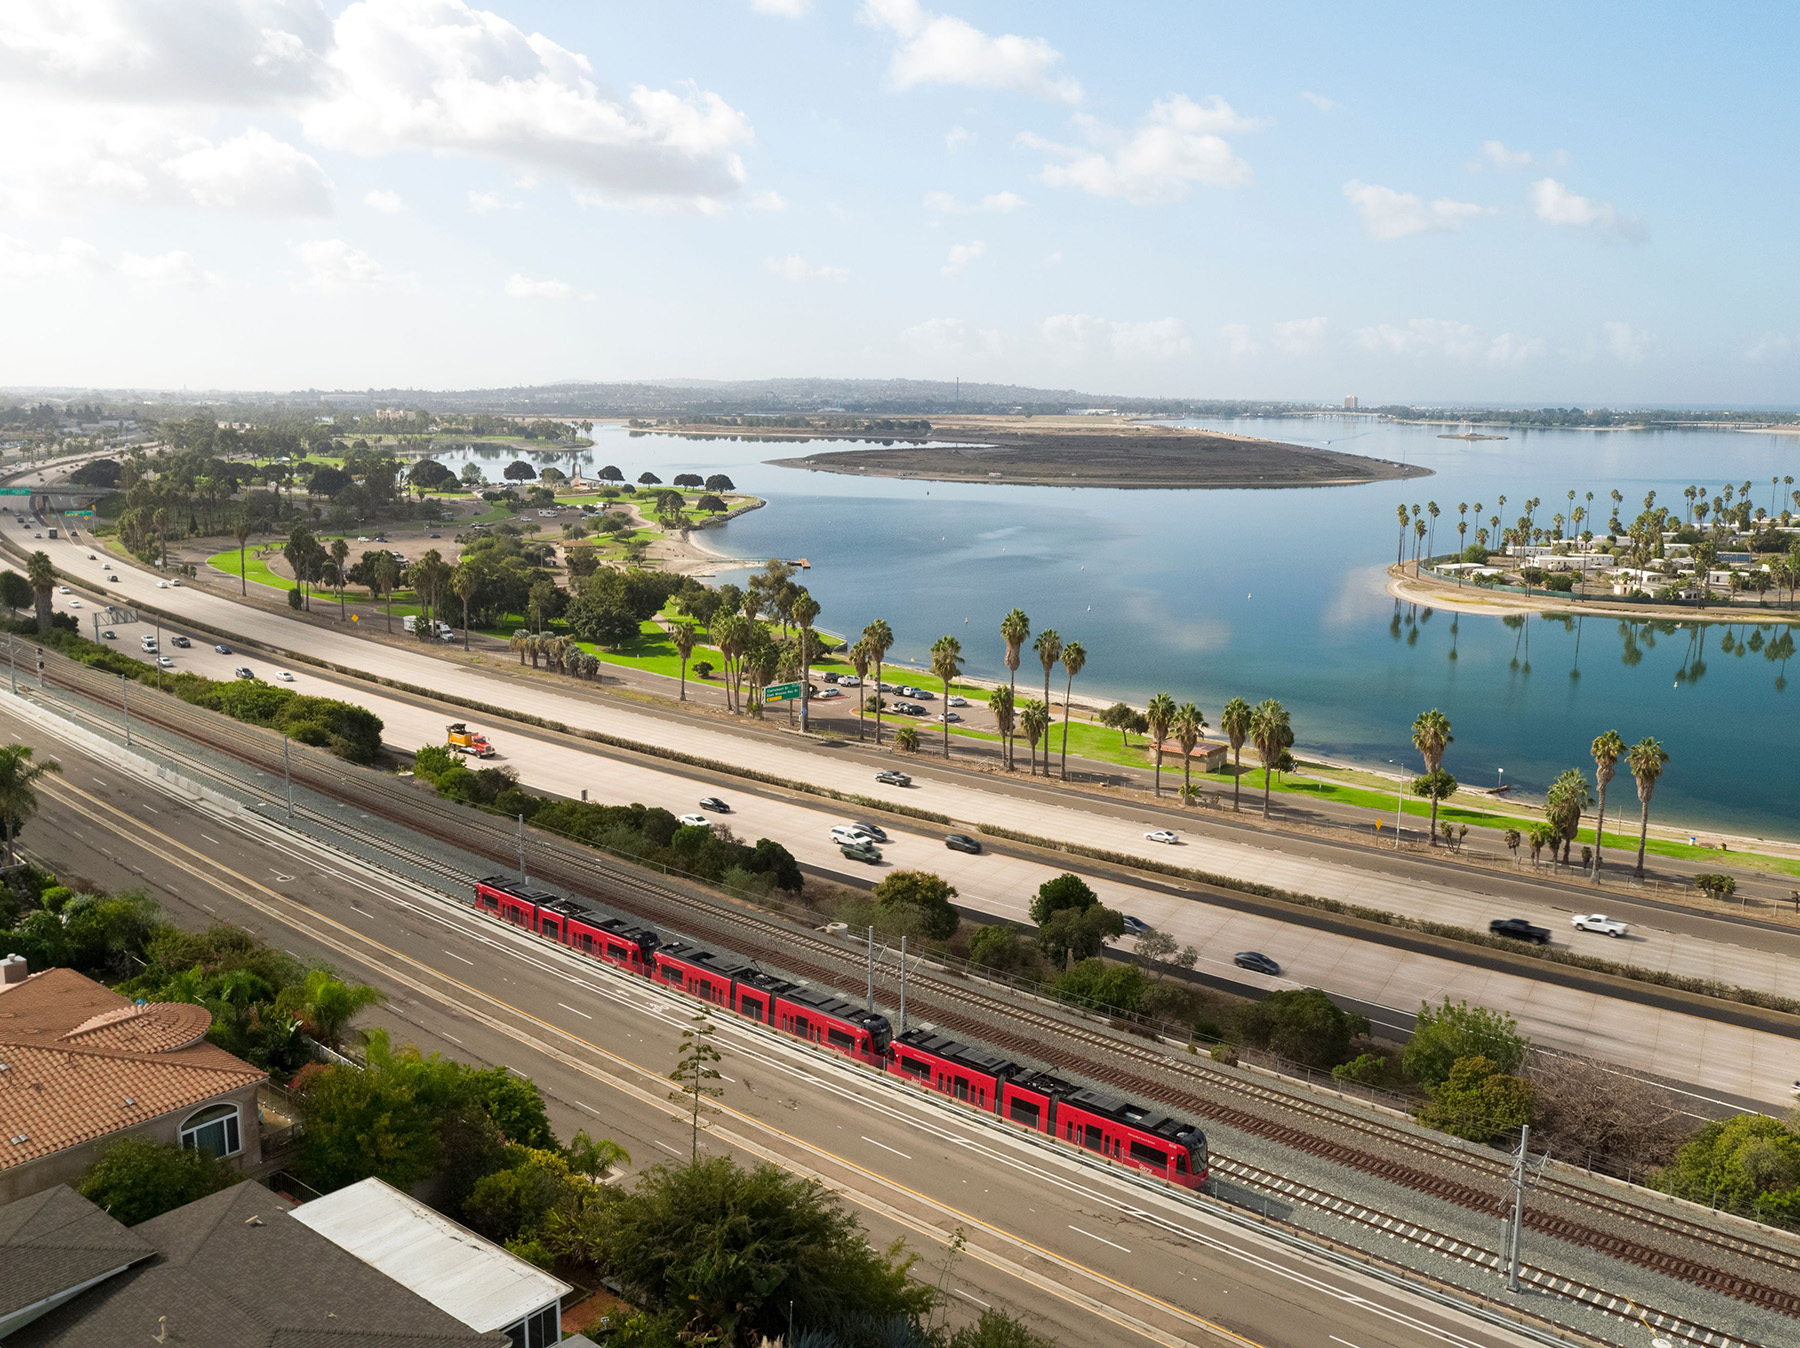 Multicar red train moves along the tracks. Water and palm trees are in the background.